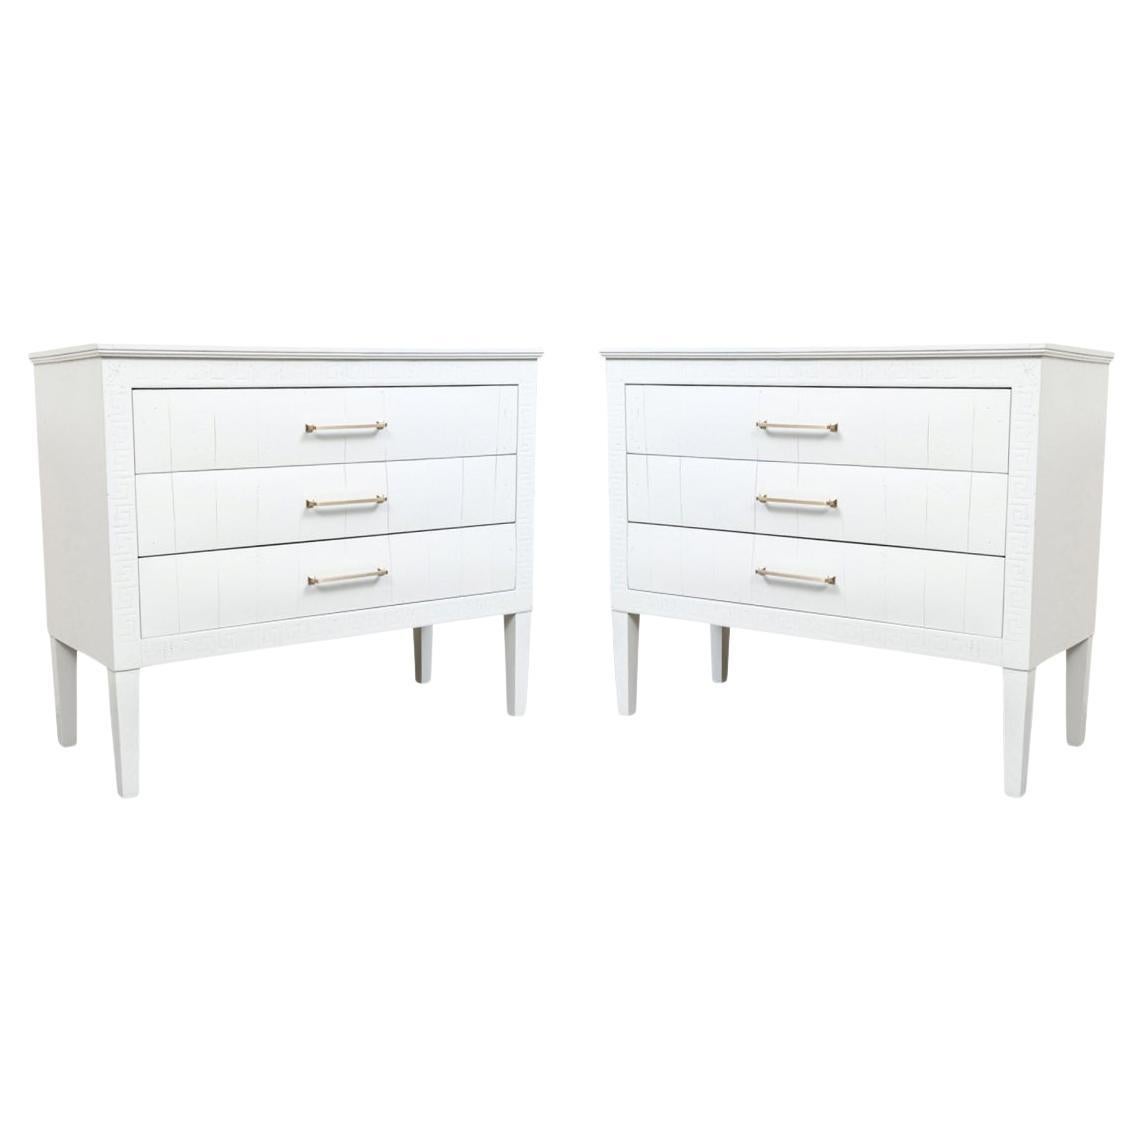 Pair Of Kreiss Furniture Light Grey Paint Decorated Credenzas For Sale